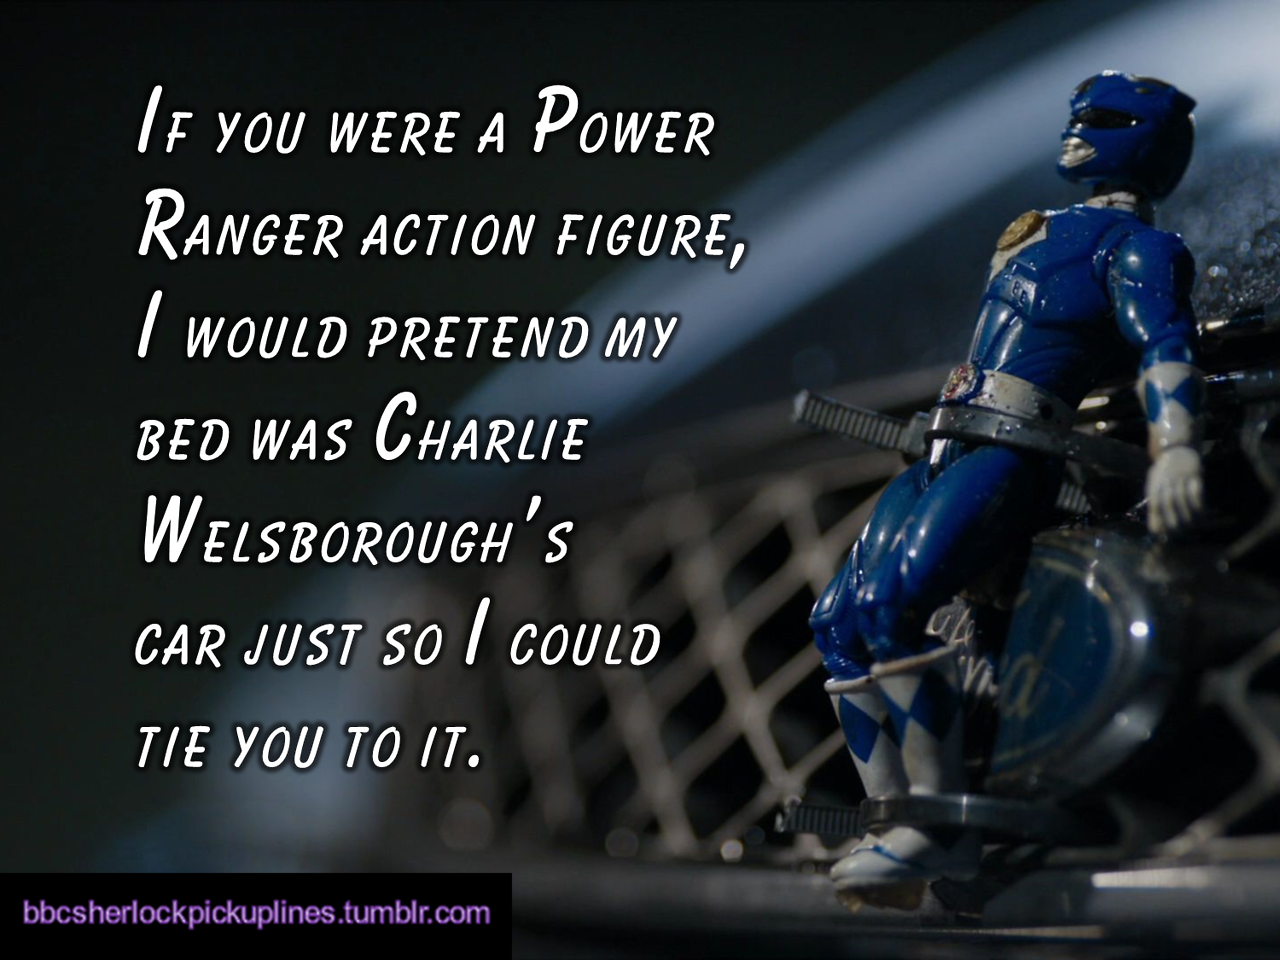 “If you were a Power Ranger action figure, I would pretend my bed was Charlie Welsborough’s